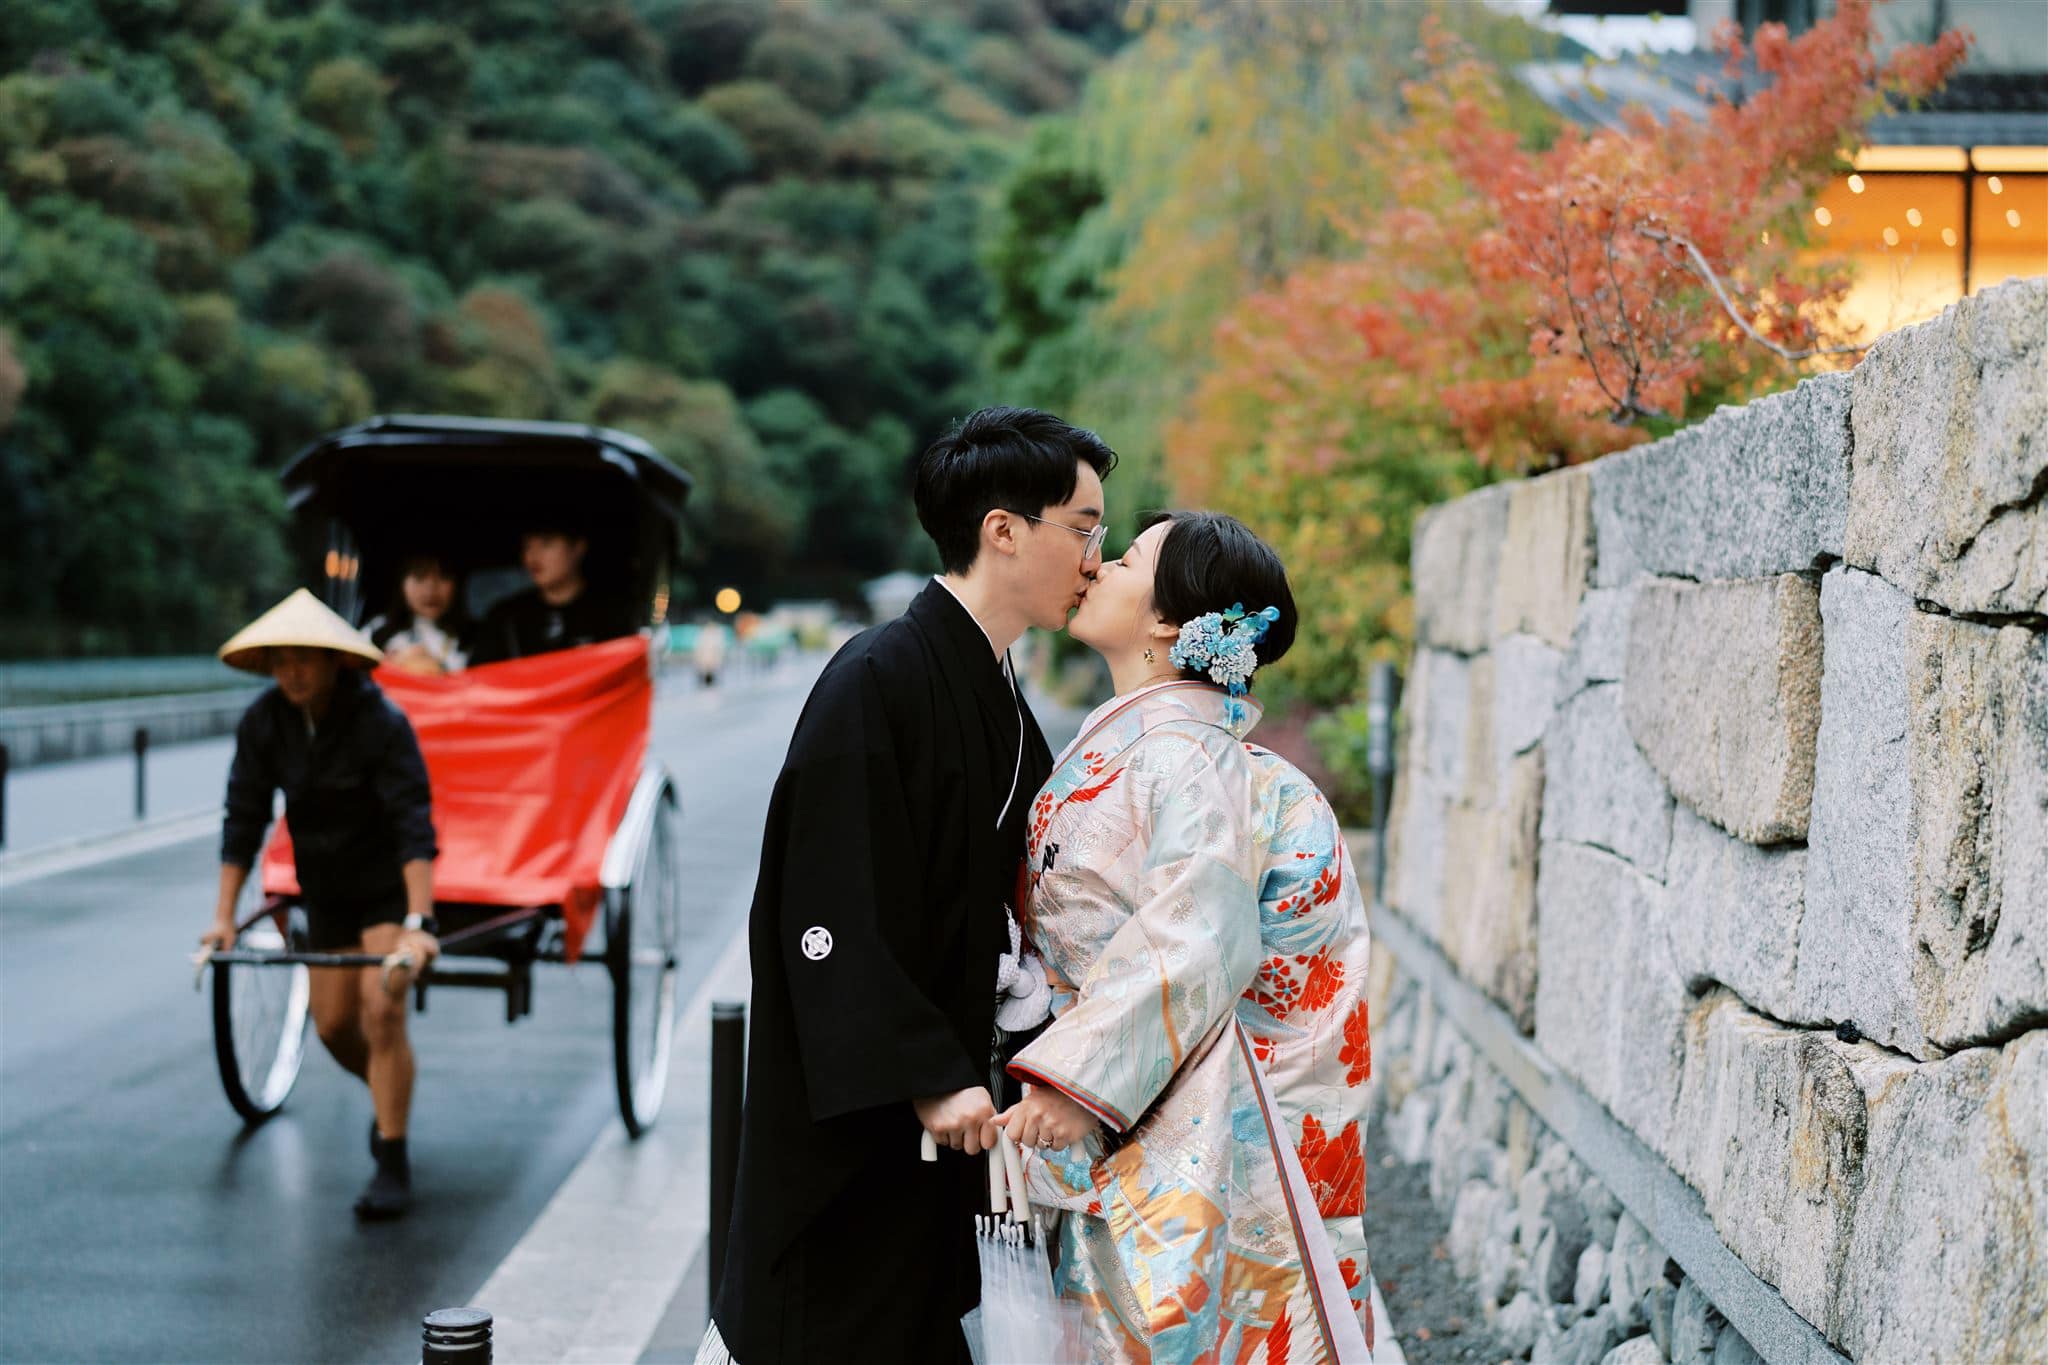 Kyoto Tokyo Japan Elopement Wedding Photographer, Planner & Videographer |         A Japanese couple having an intimate moment, captured during their elopement in Japan.